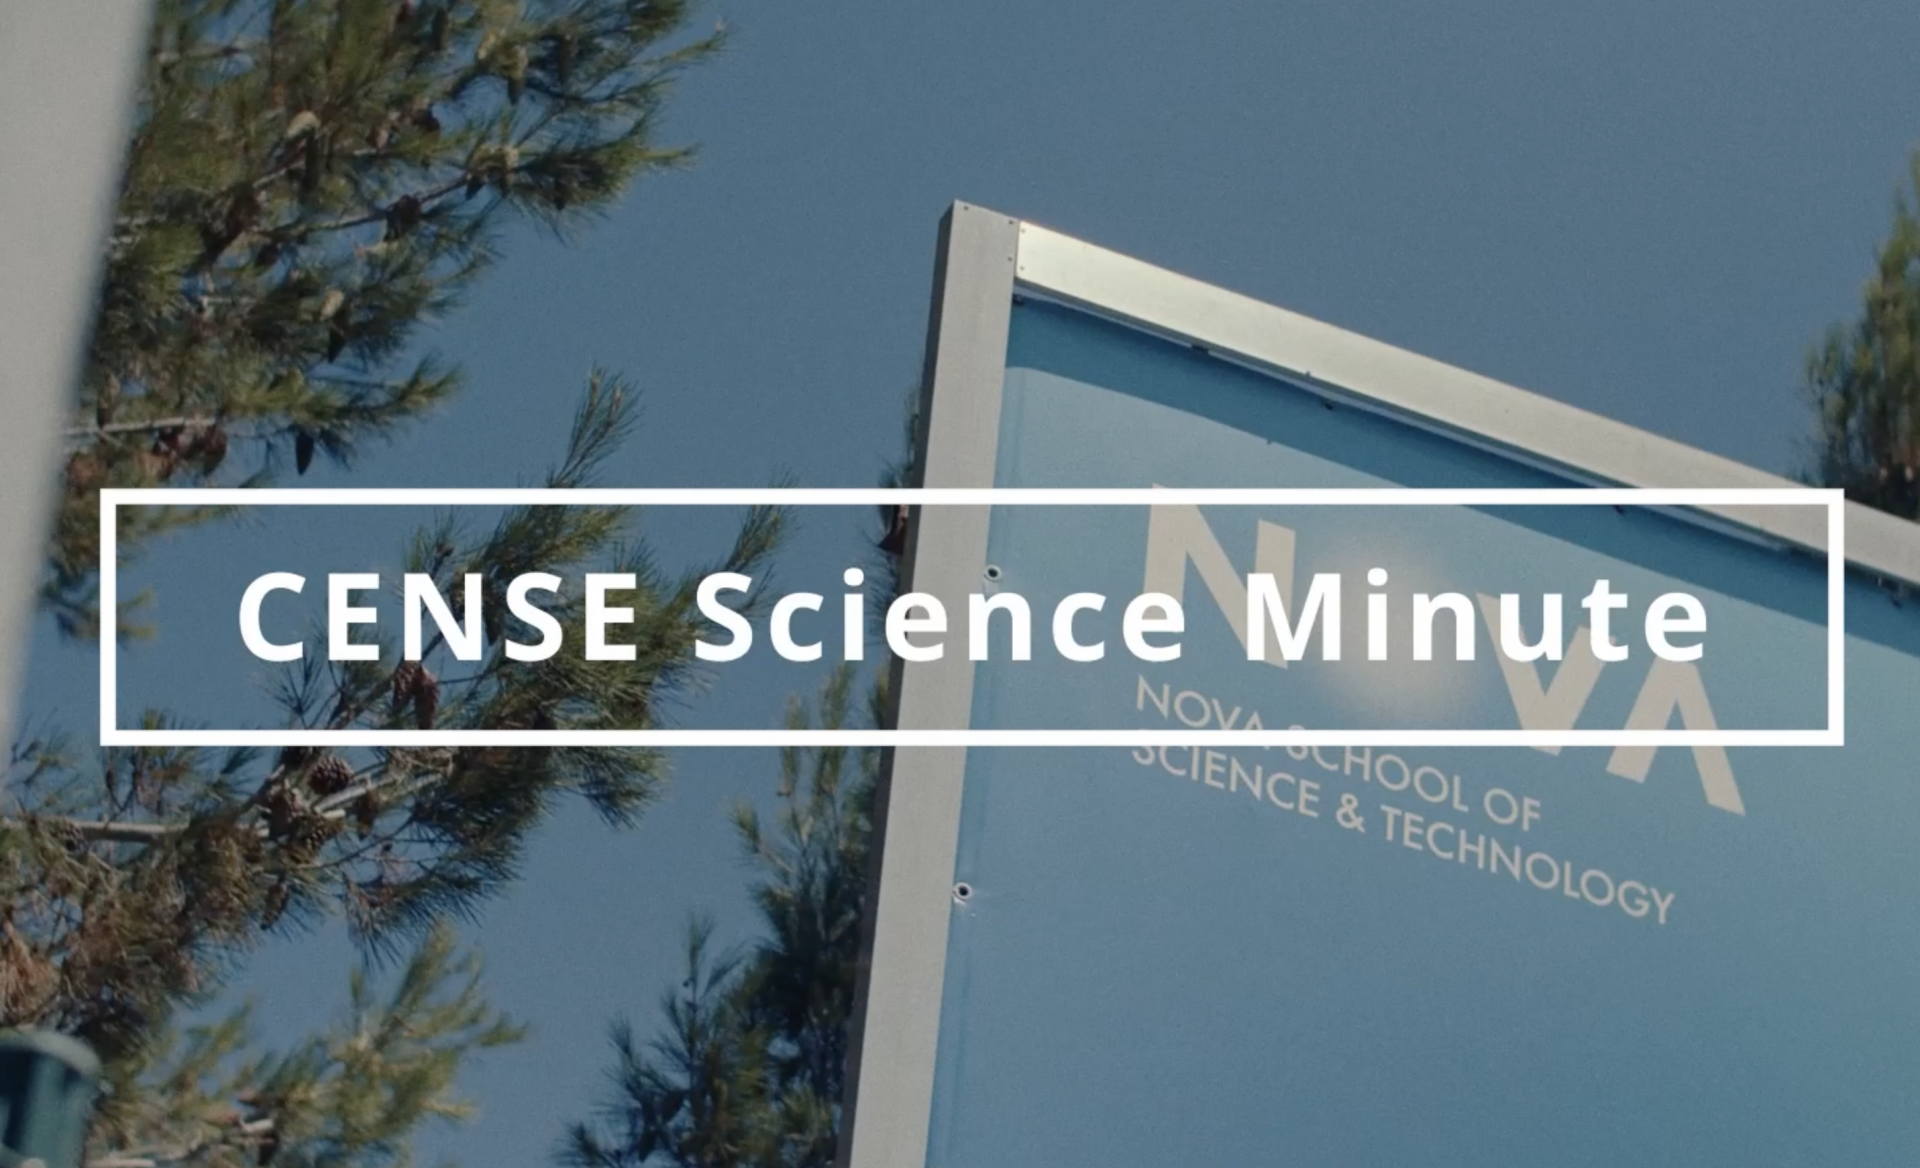 CENSE Science Minute